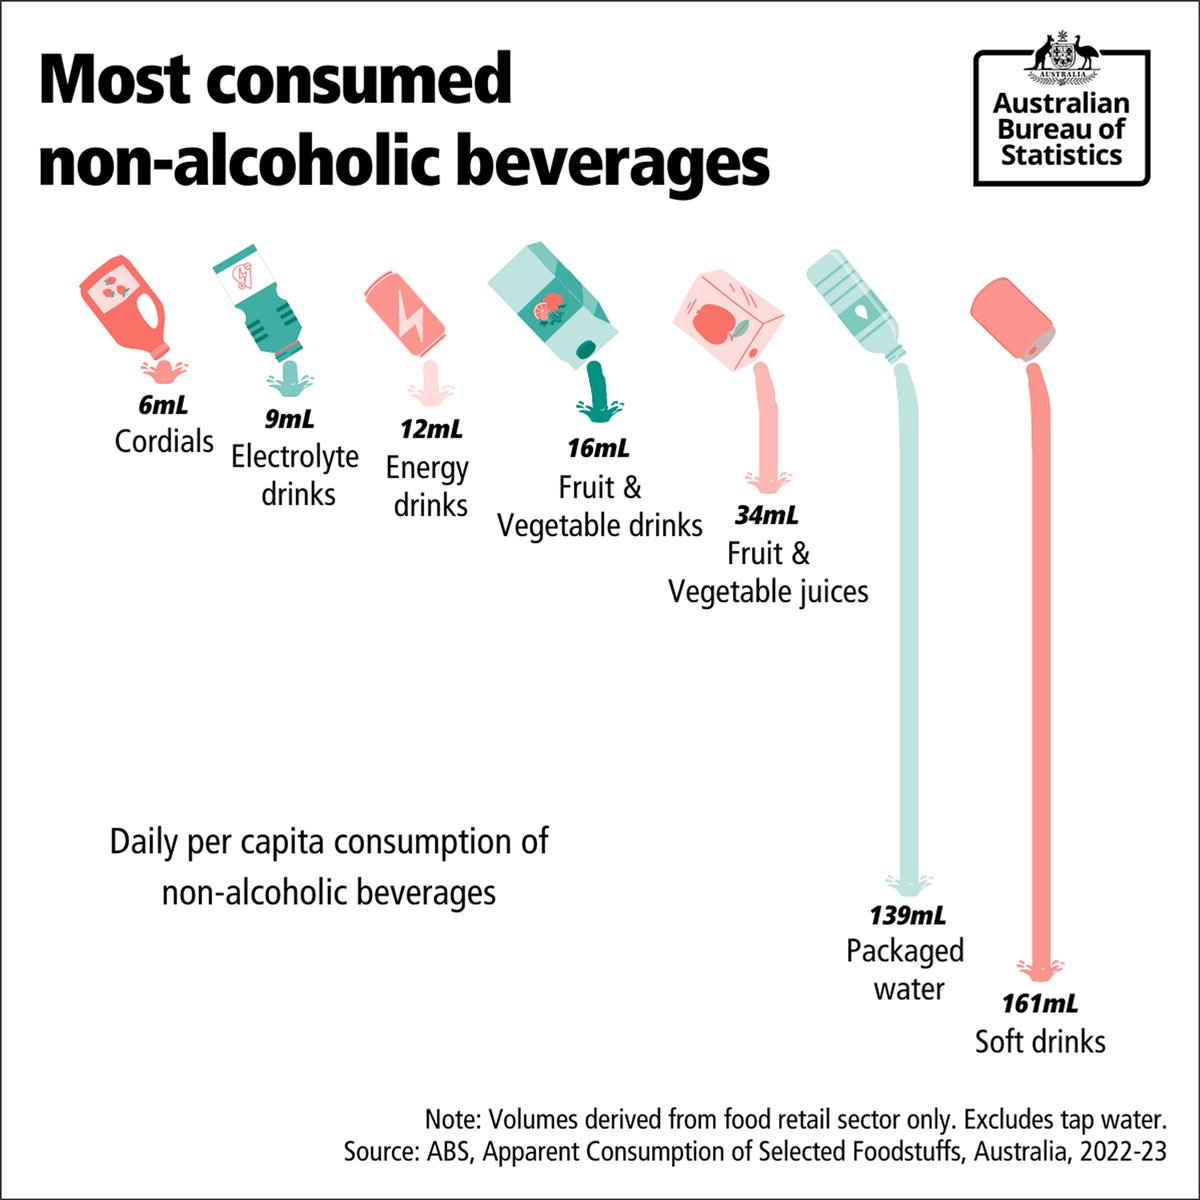 Today is #BeverageDay. Here’s a breakdown of what kind of non-alcoholic beverages Aussies are downing. We’re drinking fewer overall with apparent consumption per capita dropping by 8.7mL since 2021-22 🧃